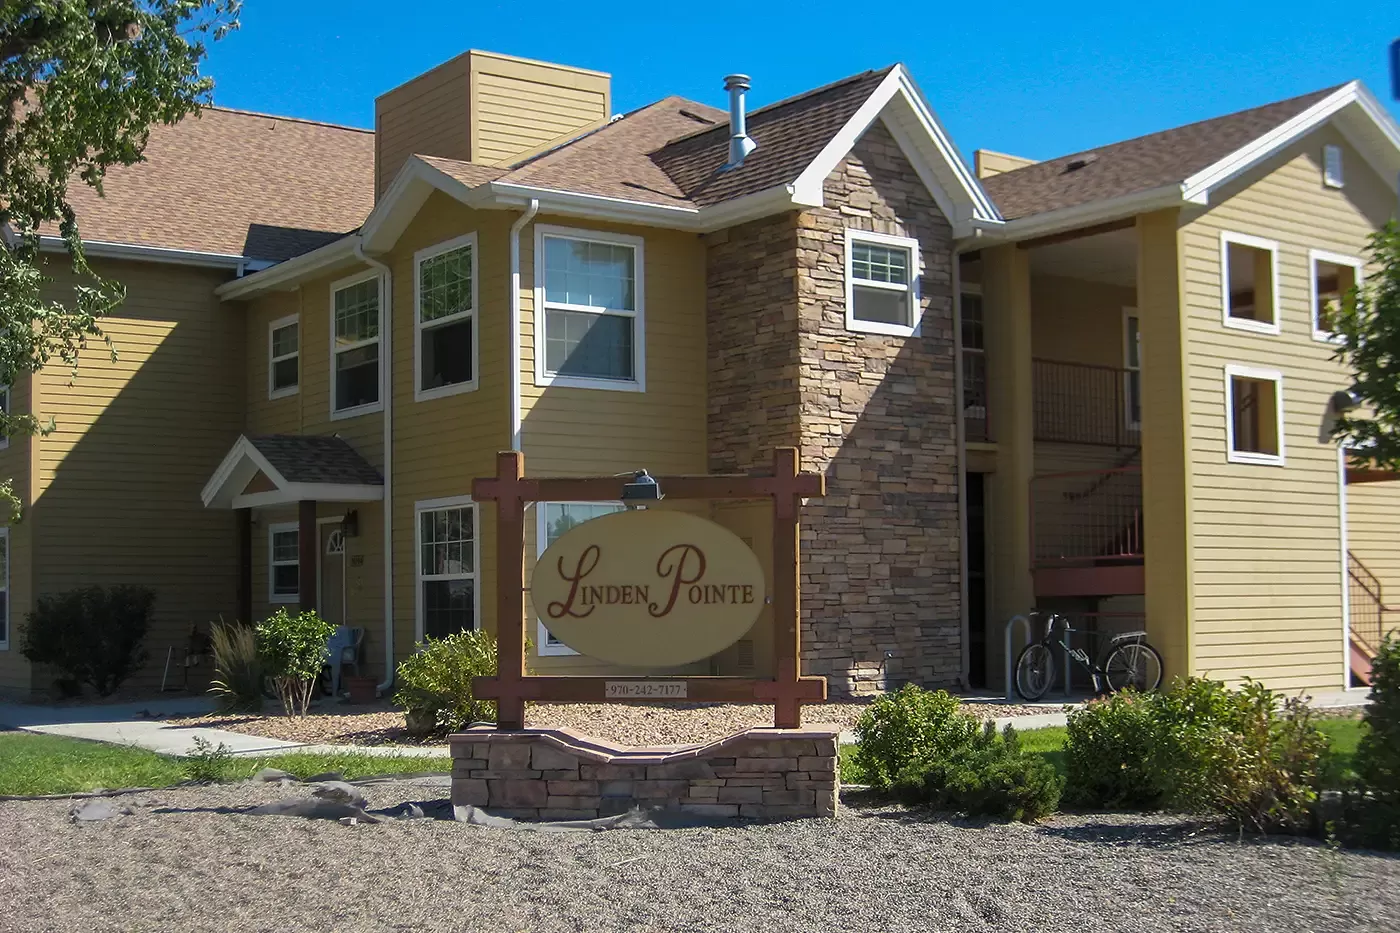 Photo of Linden Pointe appartments in Grand Junction, Colorado.